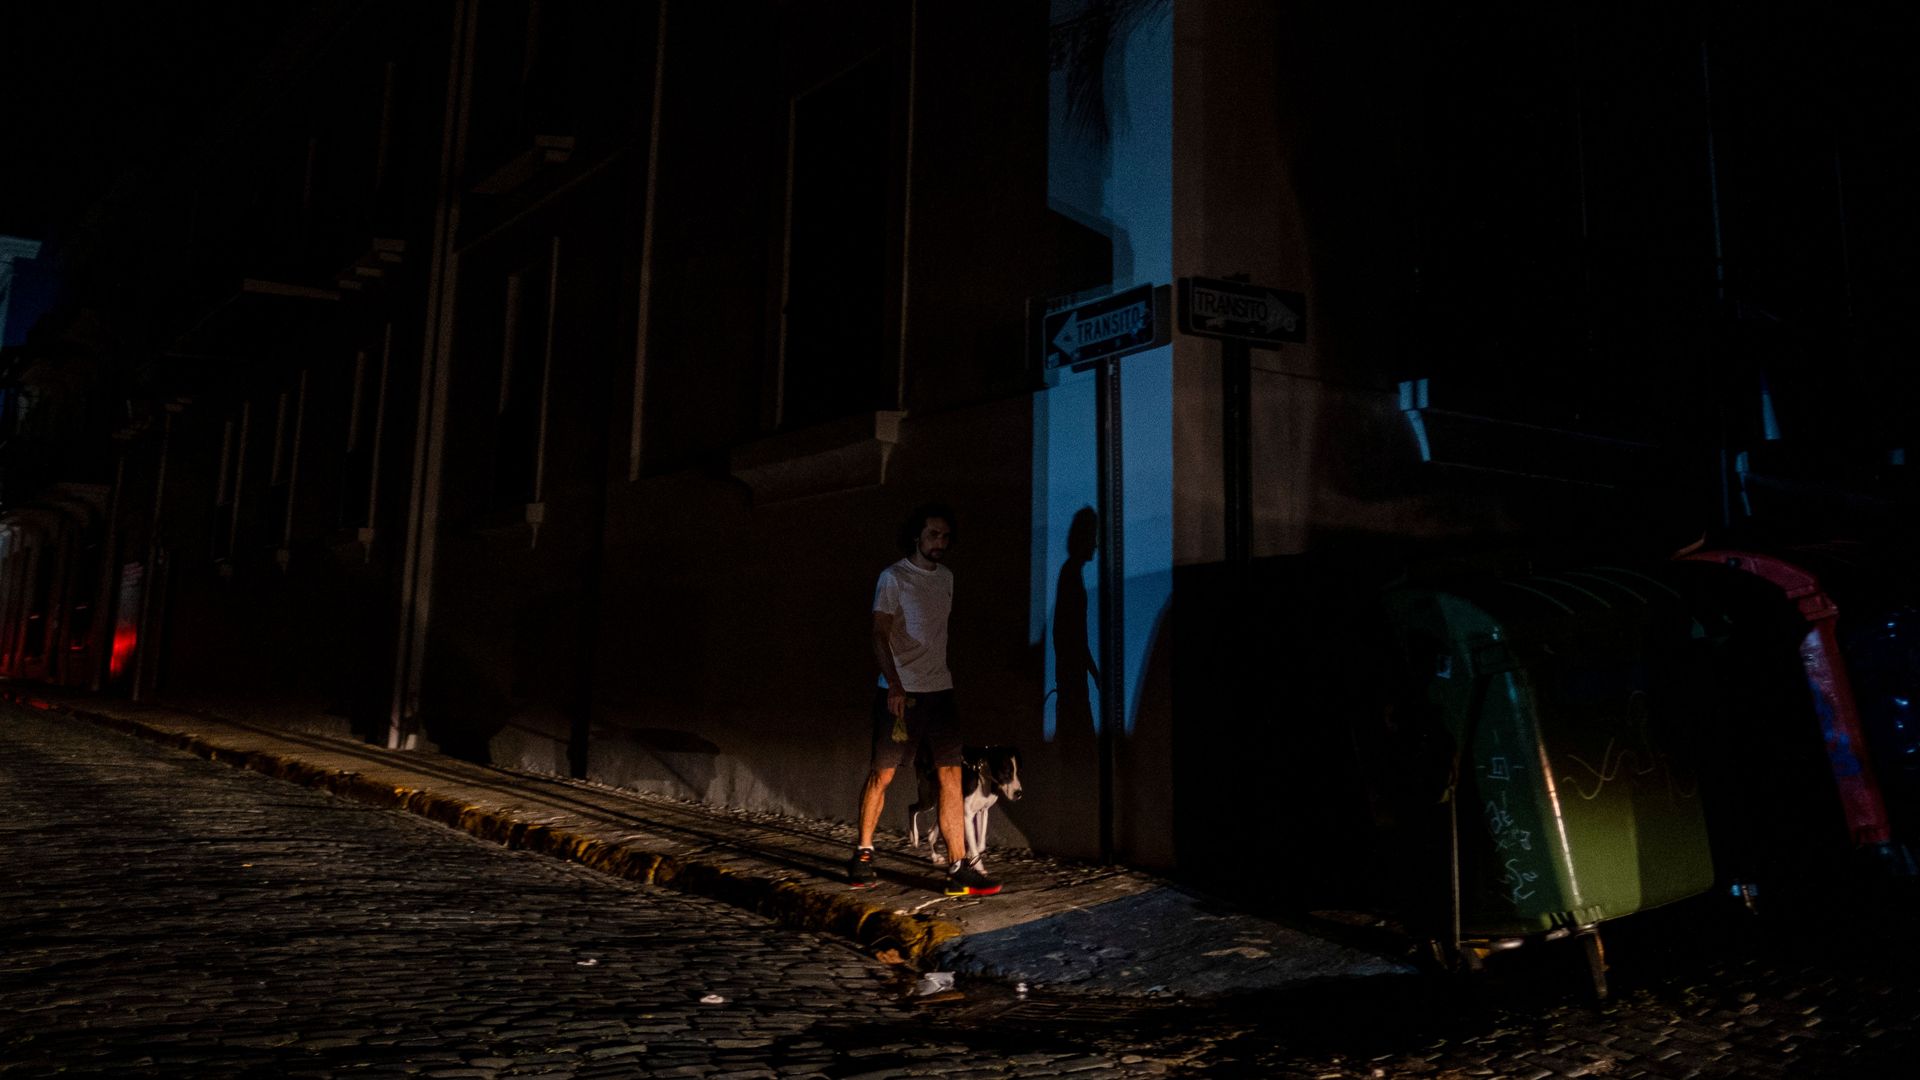 A man walks his dog in a street left in darkness by a power outage due to a cyberattack in Old San Juan, Puerto Rico, June 10, 2021.